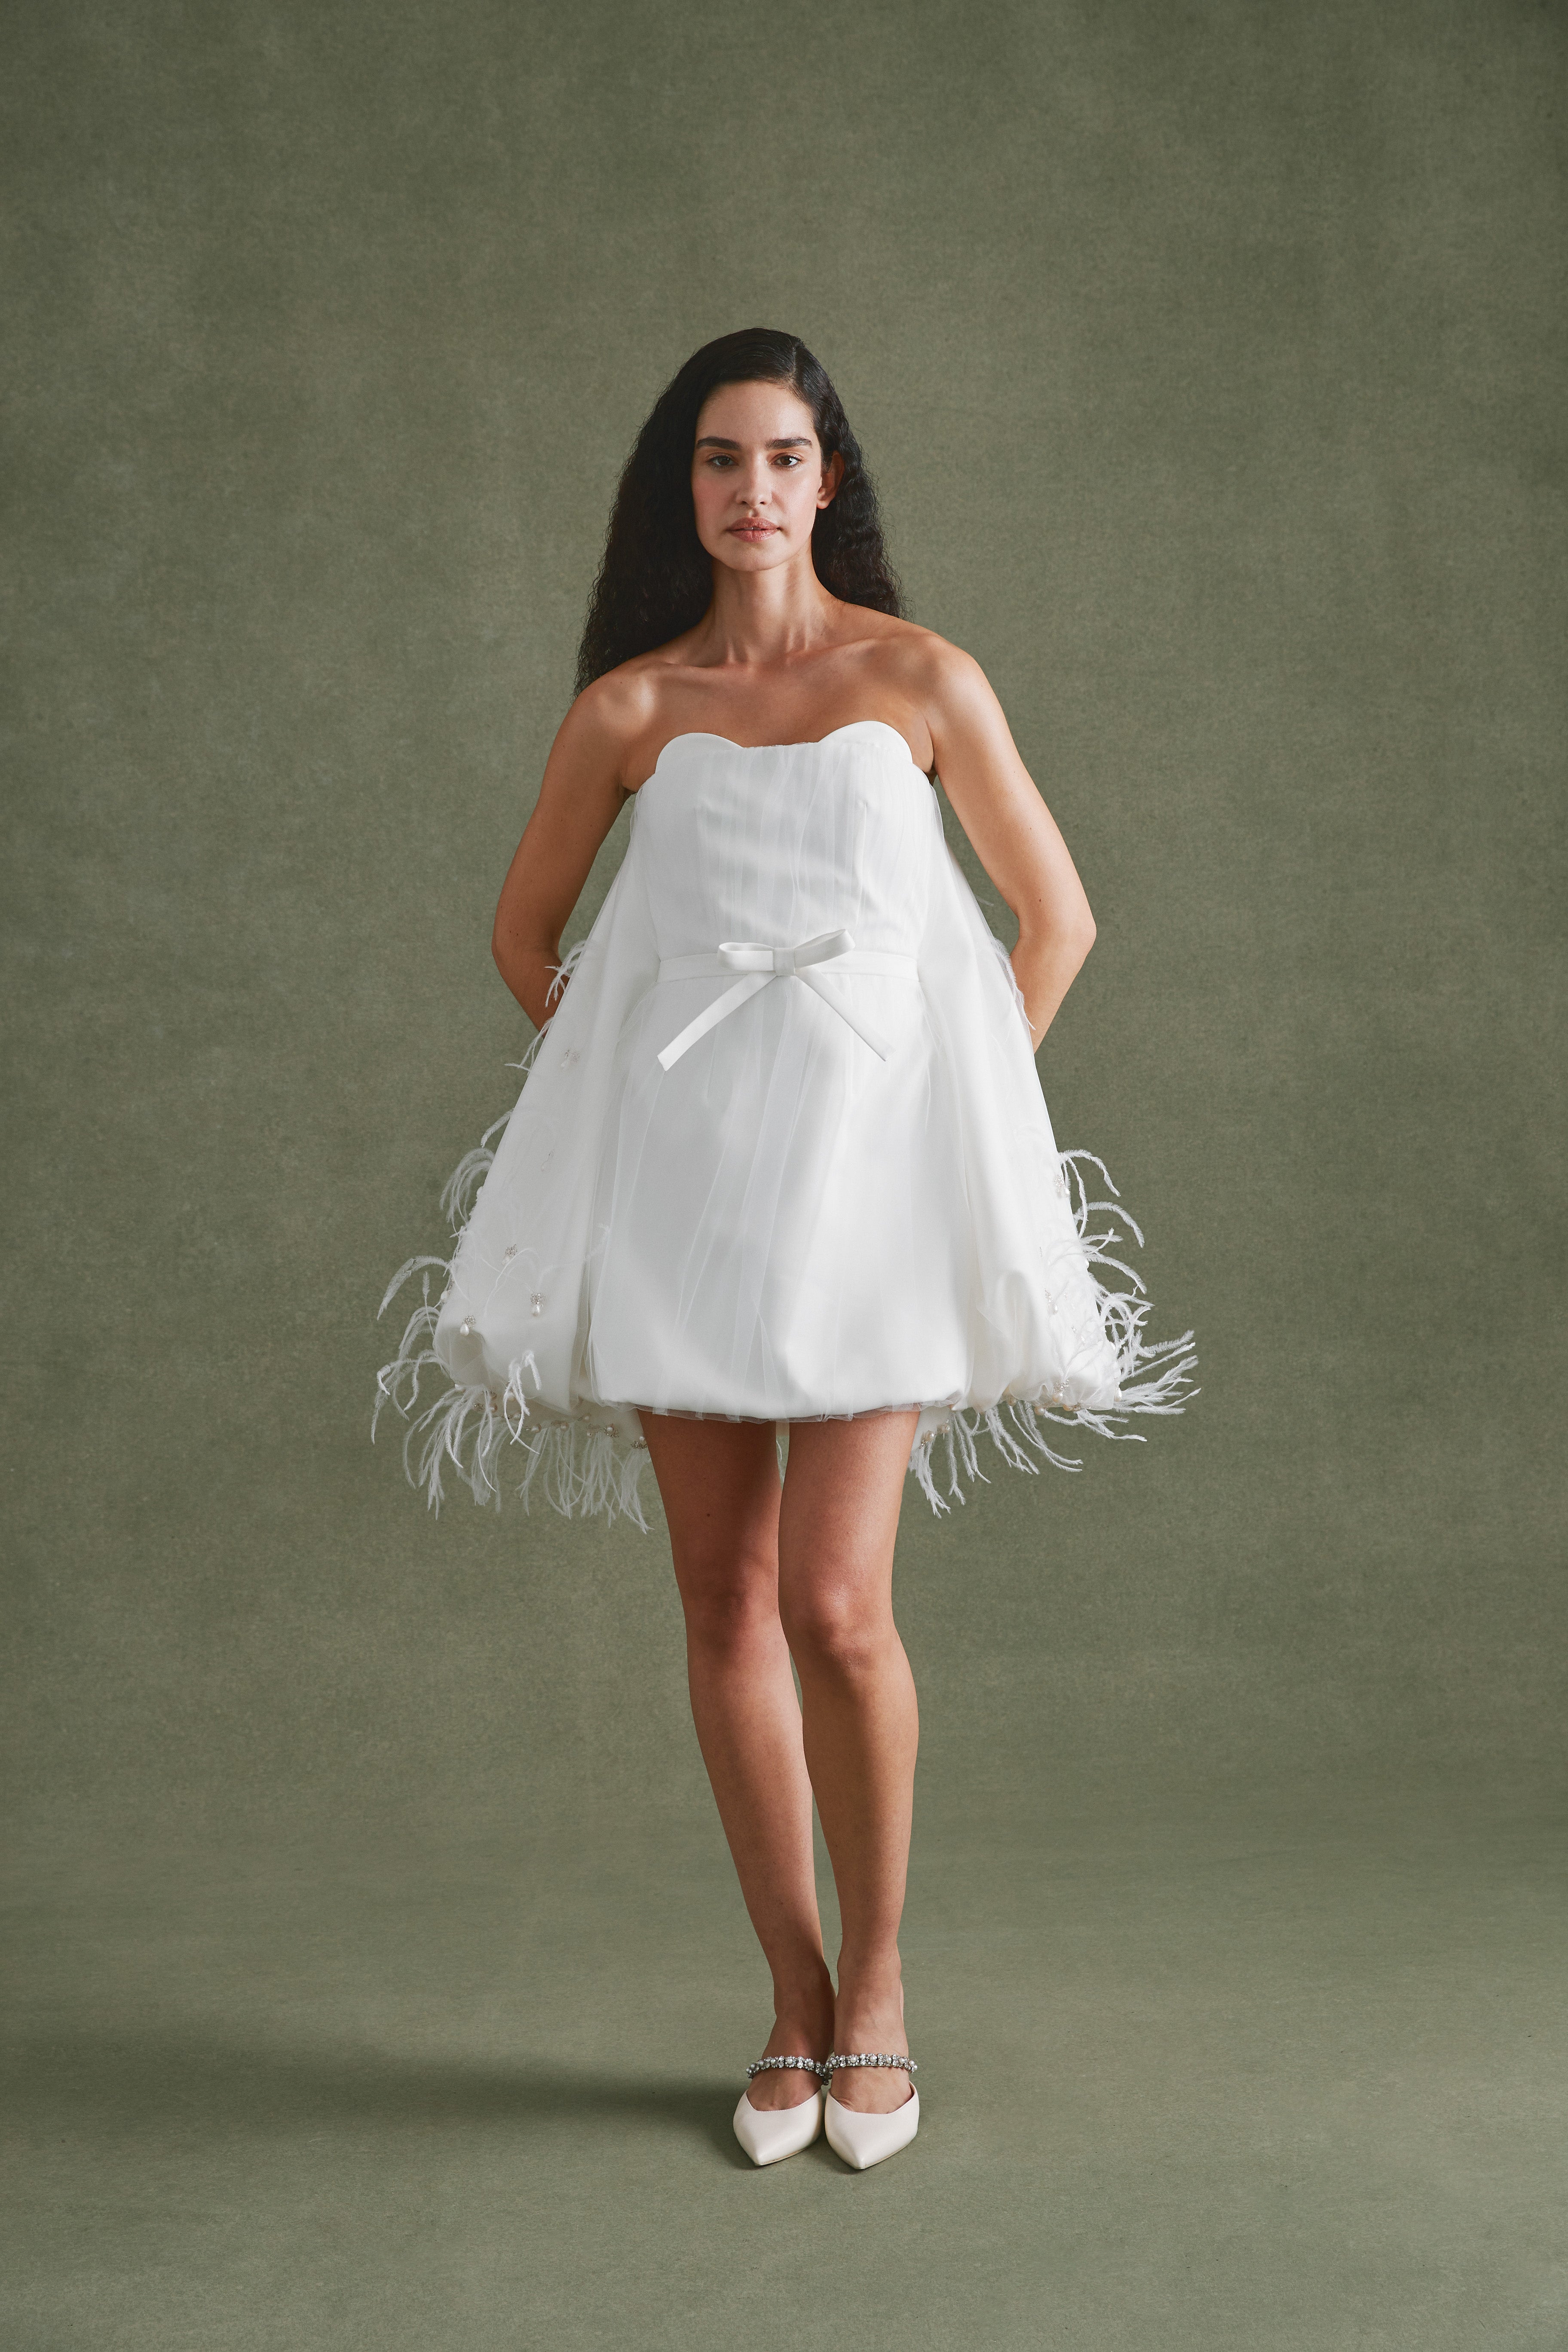 Alexandra Pijut Cloud Dress. Ivory satin mini dress with pearl and feather embellishments. After party, rehearsal dinner outfit.